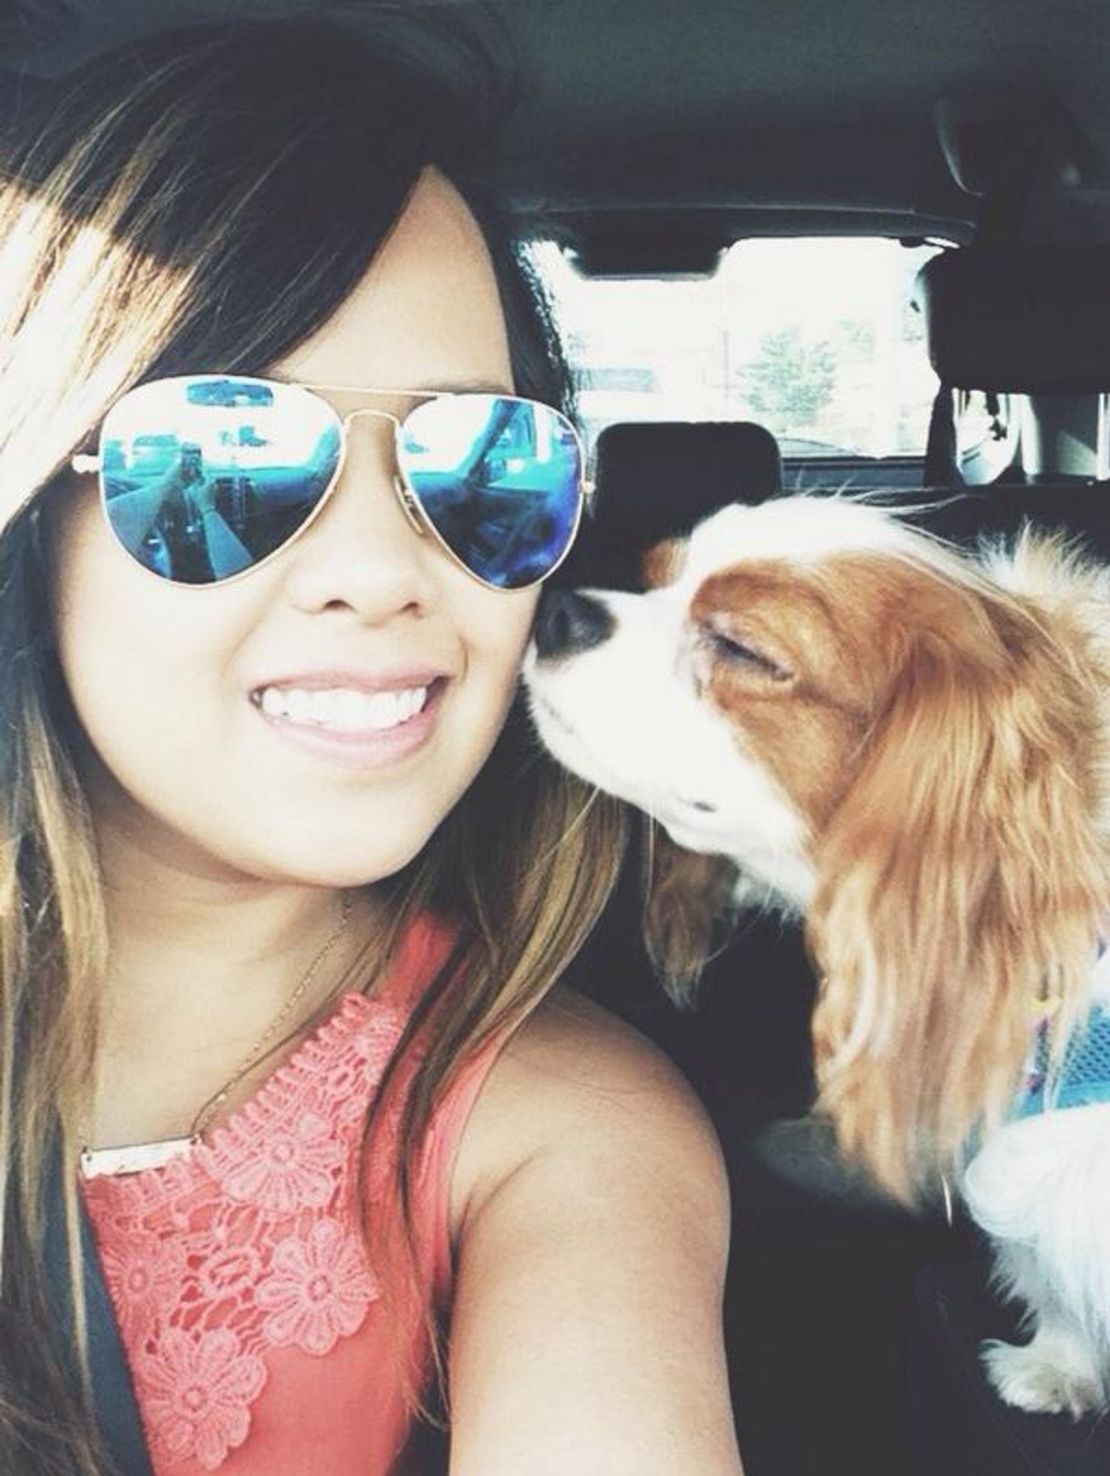 Nina Pham rides with her dog, Bentley, as seen in this photo from Facebook. After Pham's treatment for Ebola and Bentley's quarantine, the two were reunited Saturday.